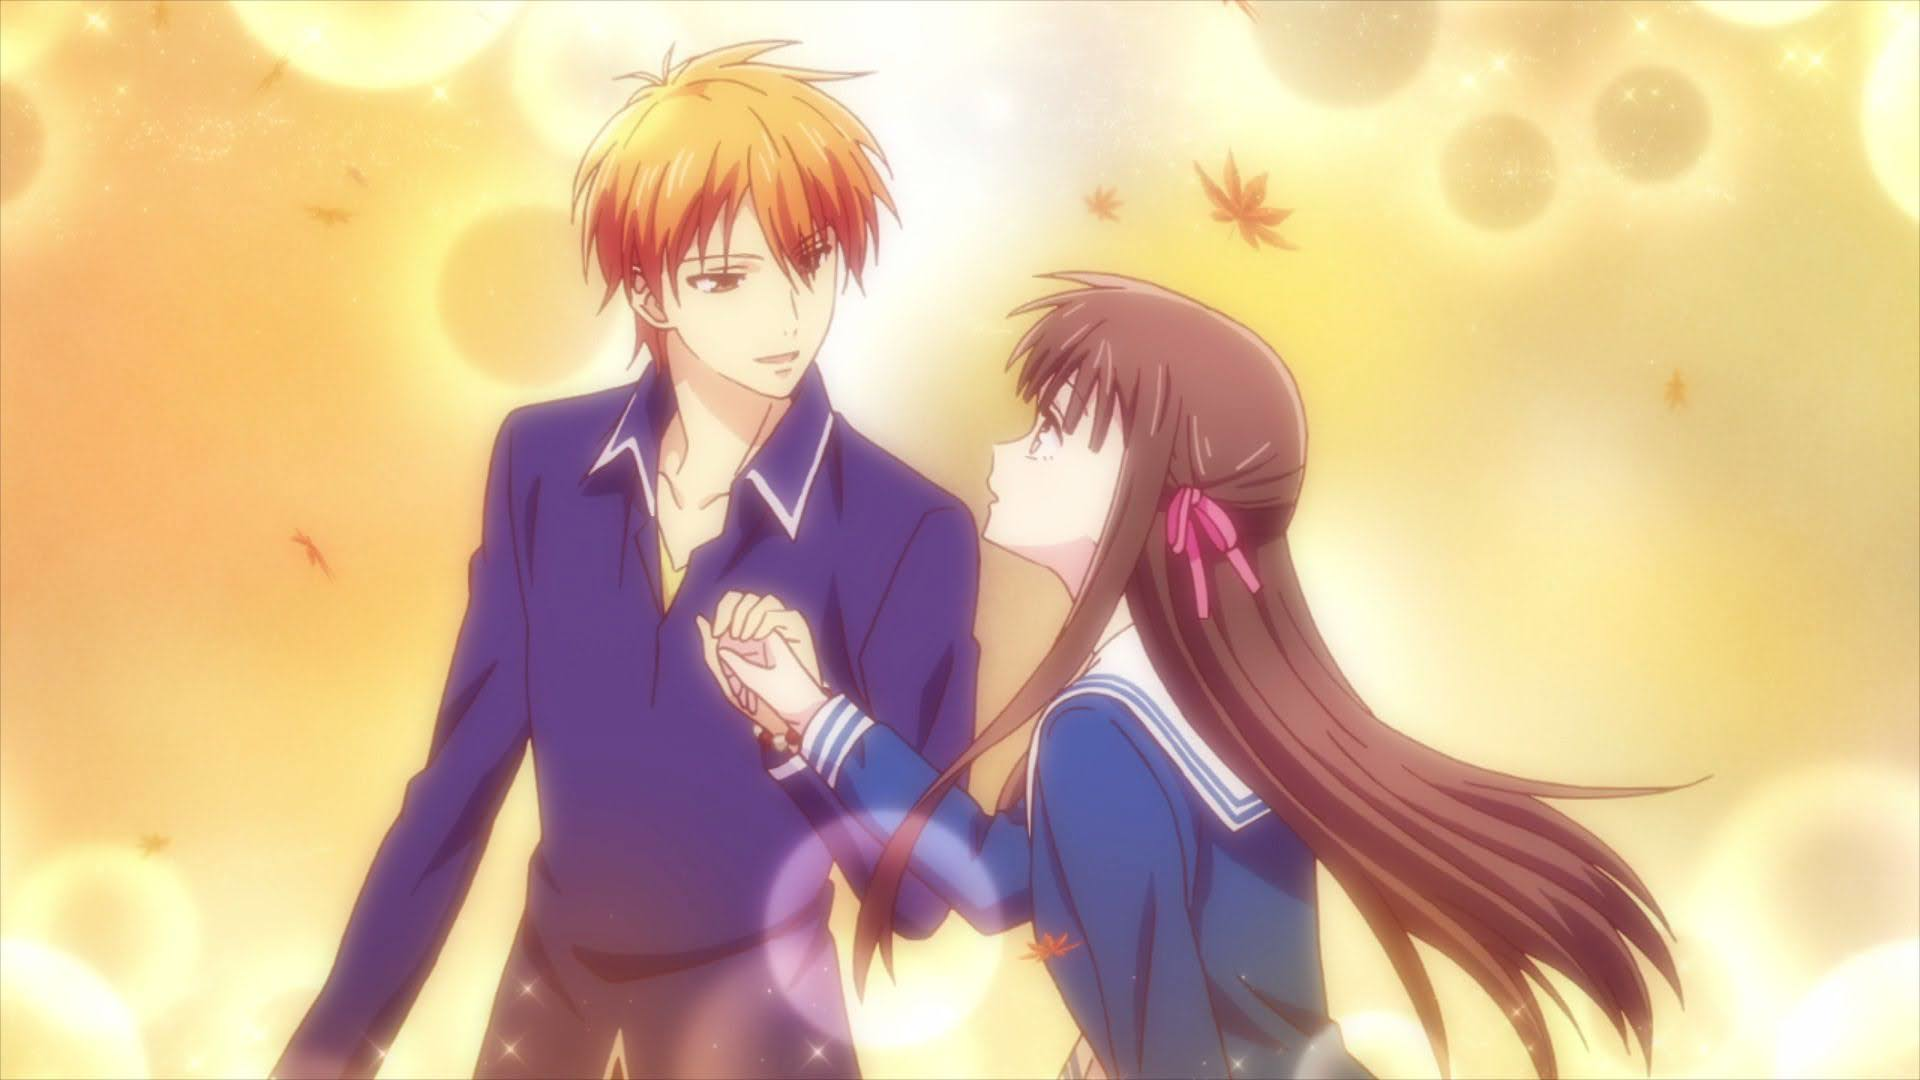 Which Fruits Basket Character Are You  HowStuffWorks